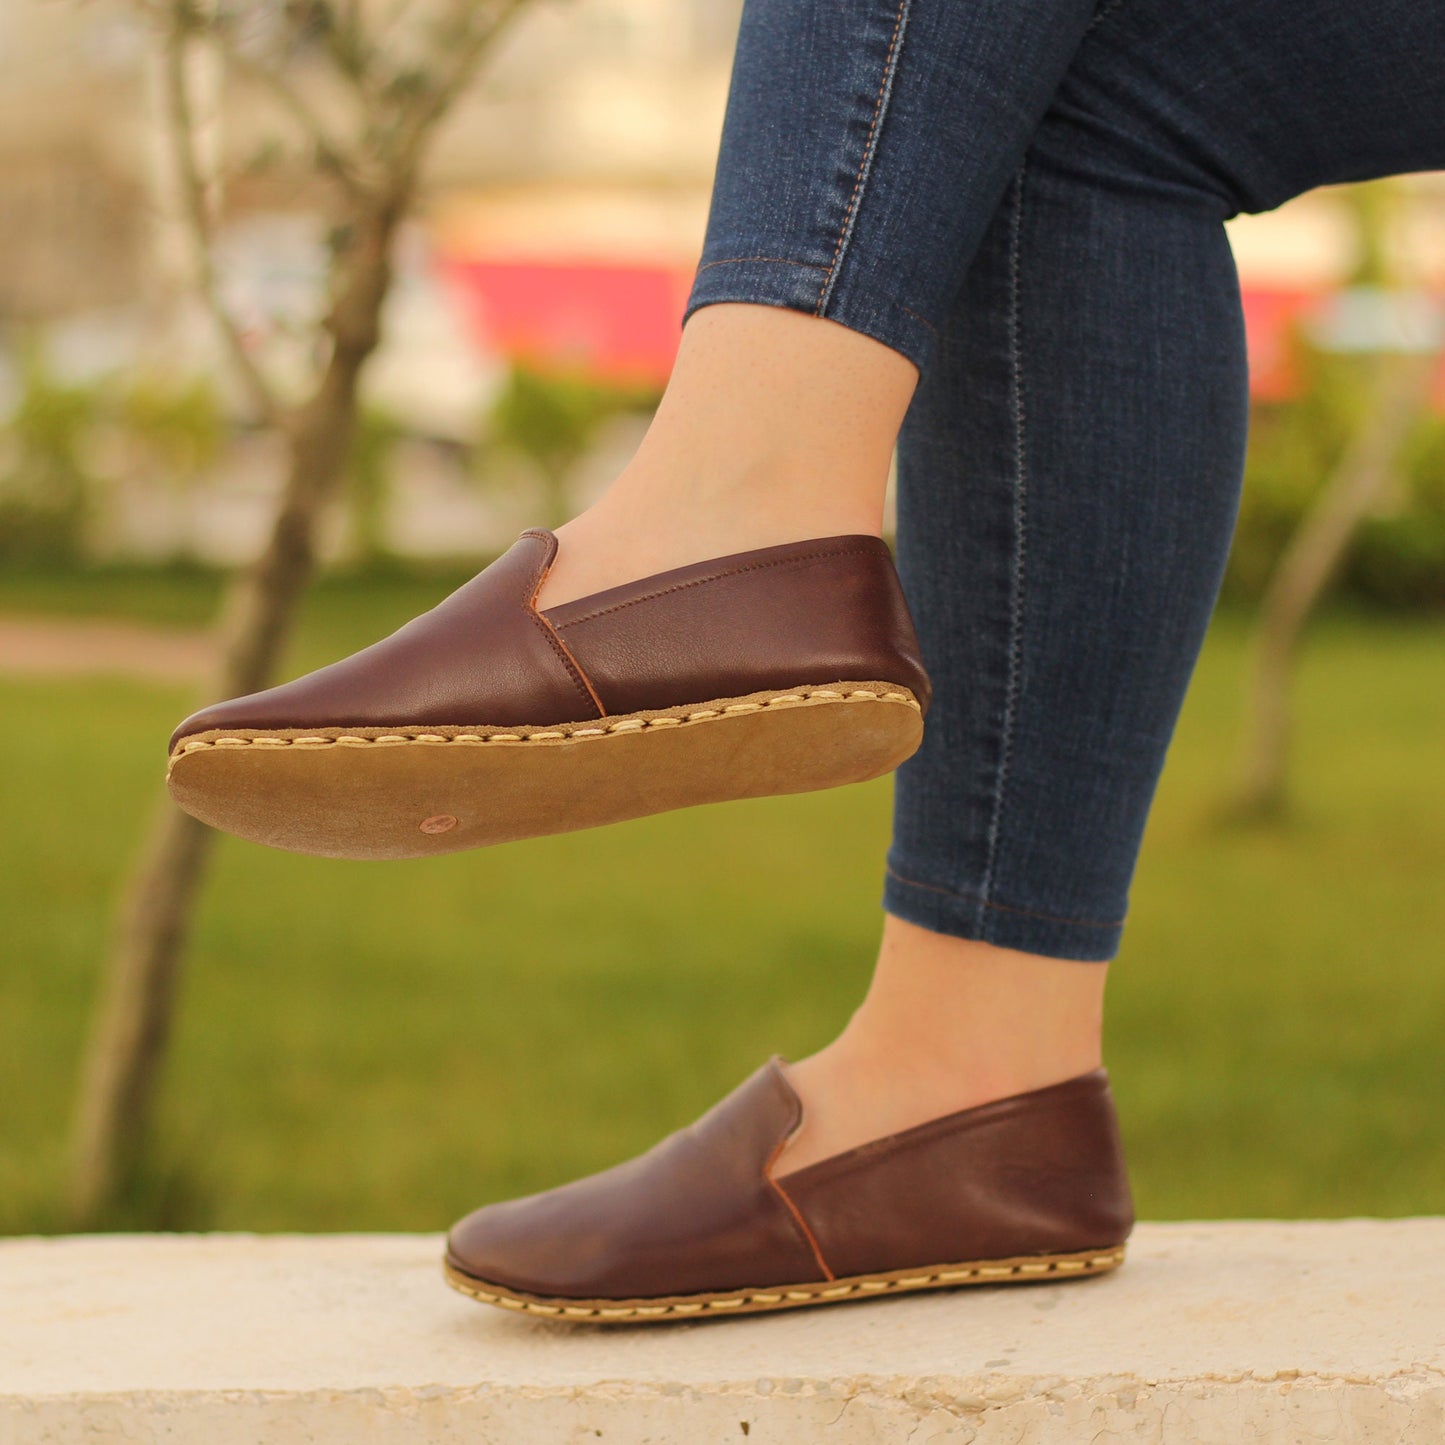 Connect with the Earth in Style and Comfort with Dark Brown Leather Earthing Shoes for Women with Wide Toe Box